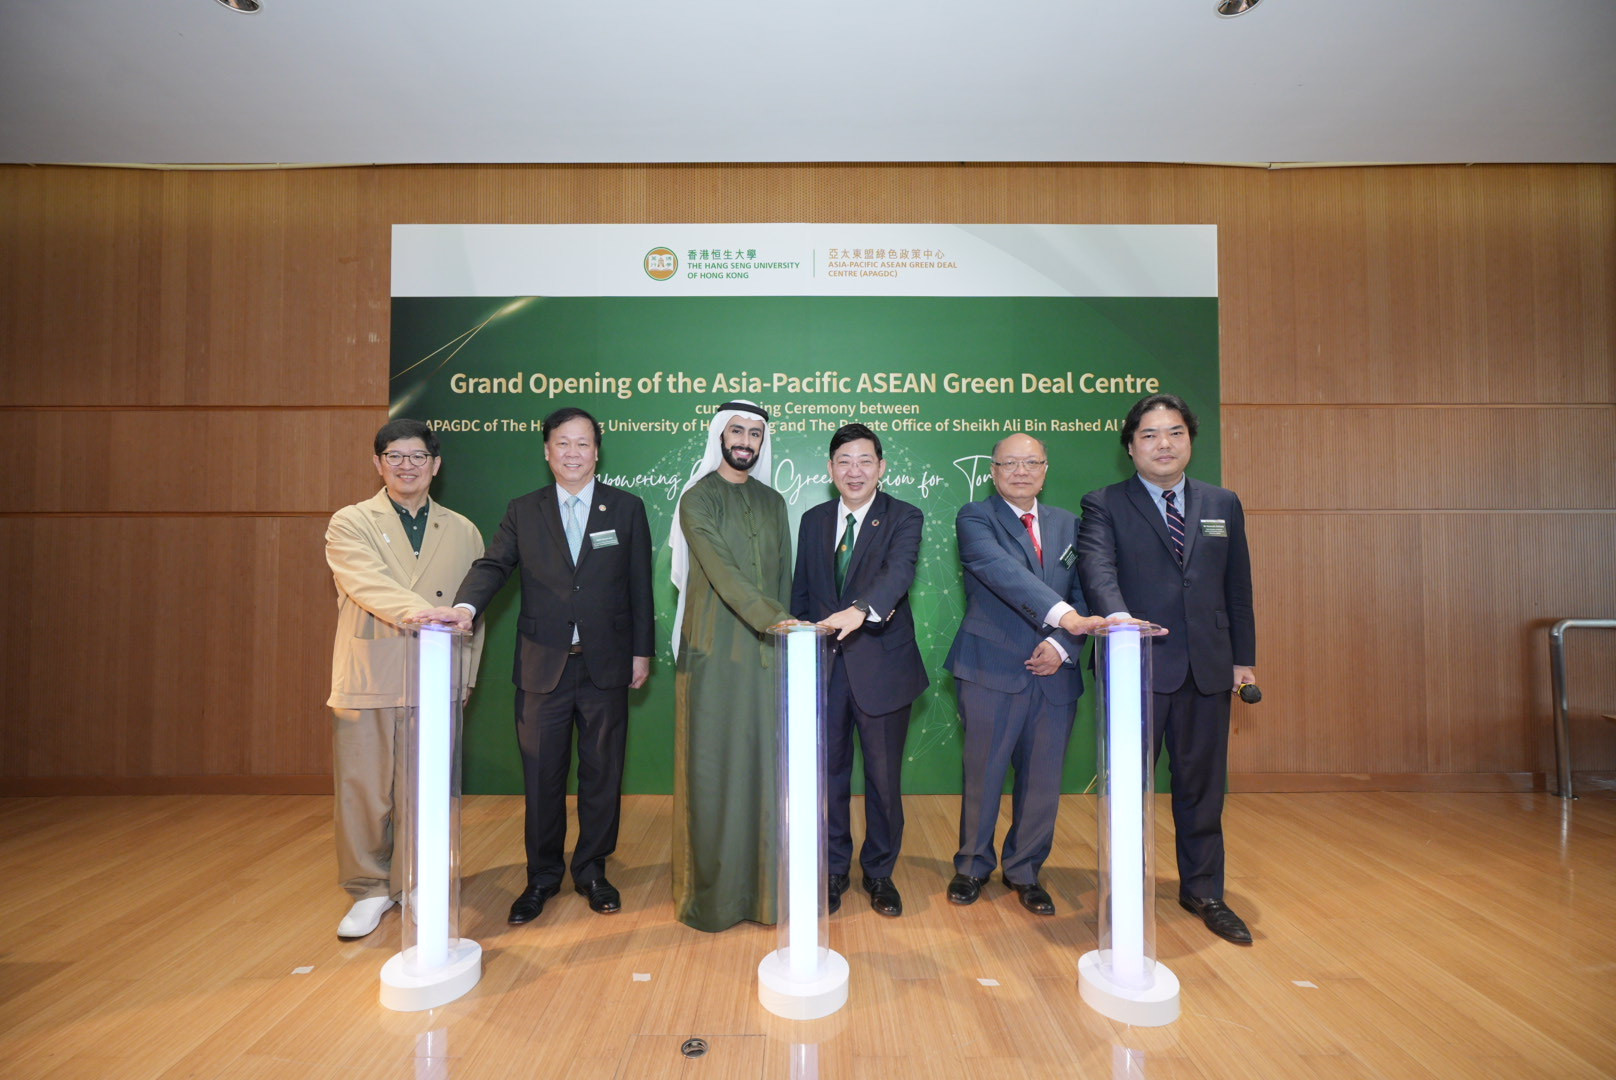 The Opening Ceremony of the Asia-Pacific ASEAN Green Deal Centre (APAGDC).